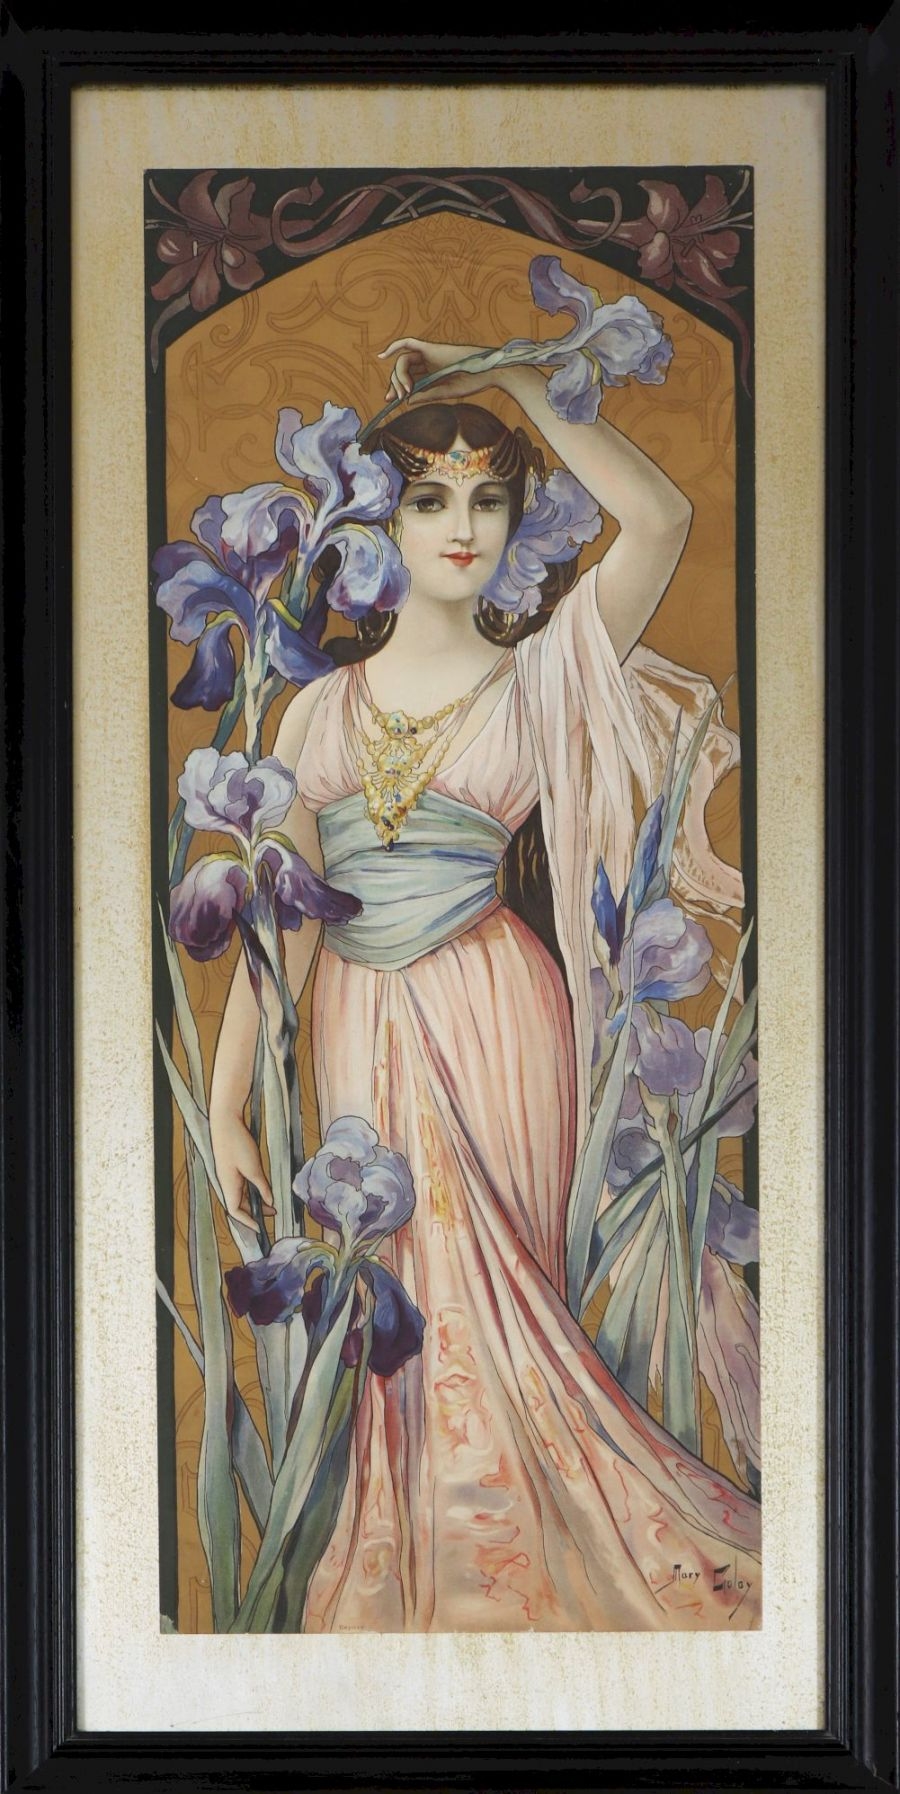 Elegance by Mary Golay, 1904